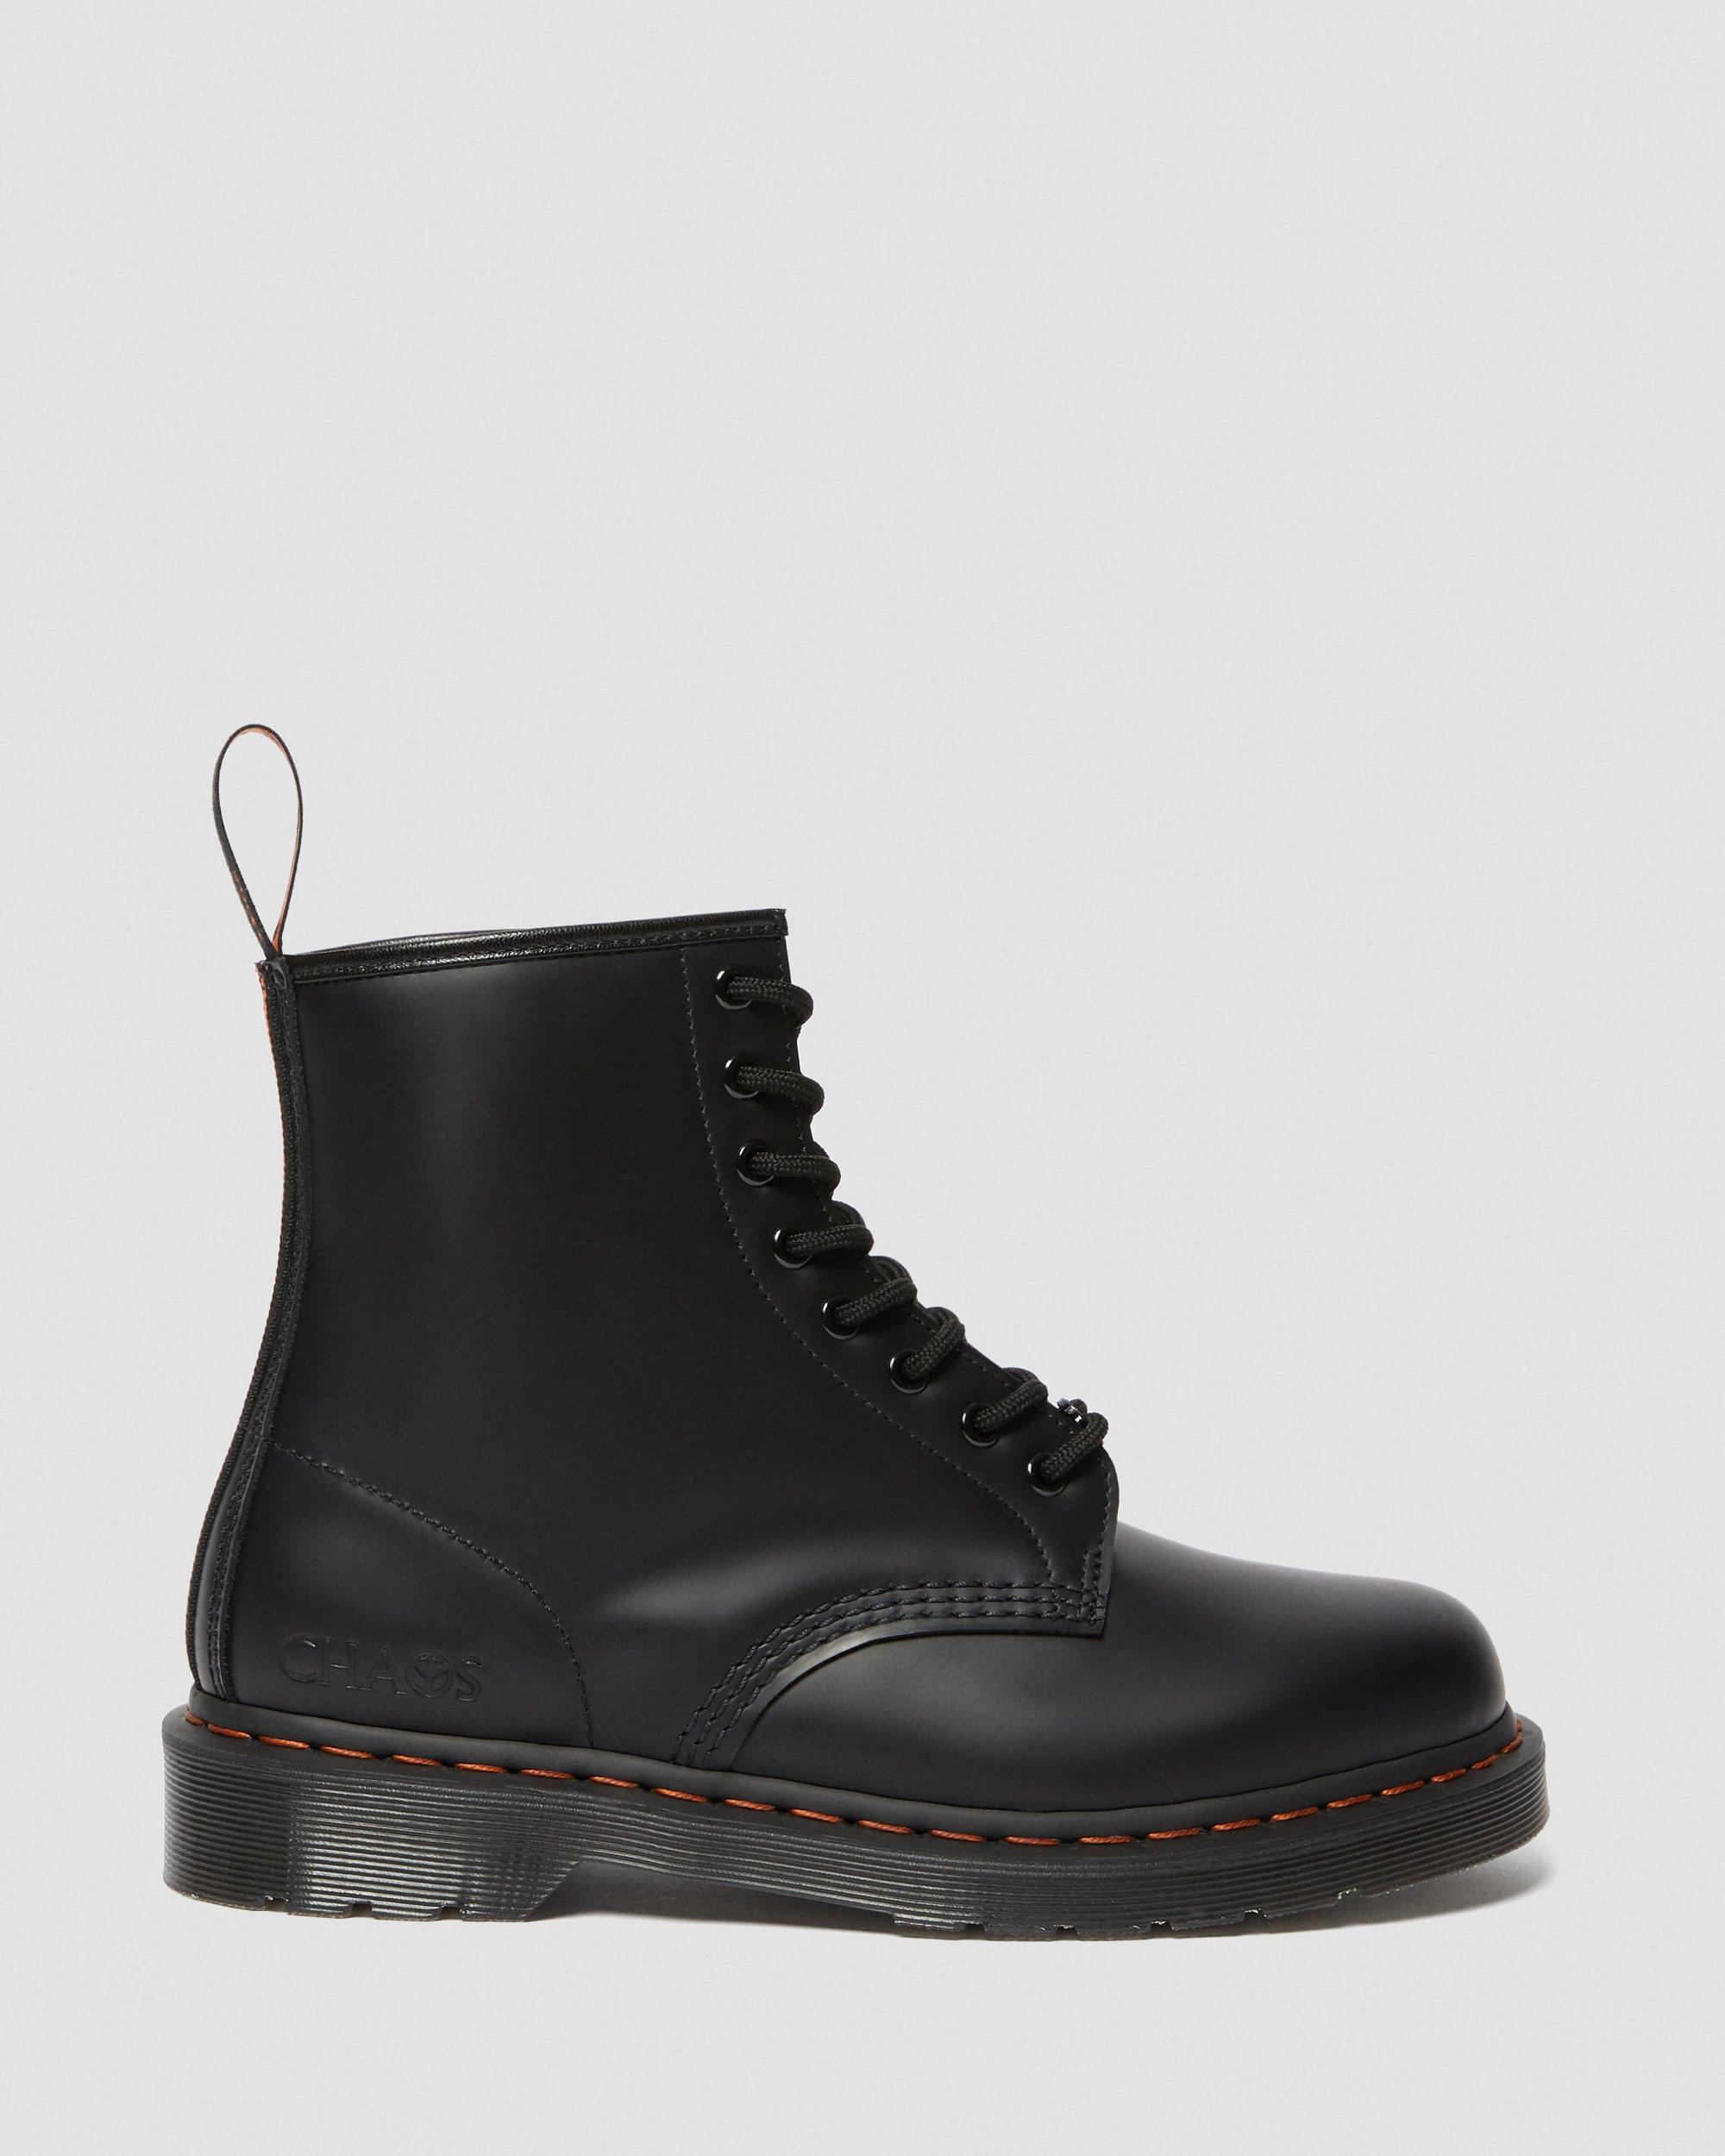 1460 Beams X Babylon Smooth Leather Boots in Black | Dr. Martens